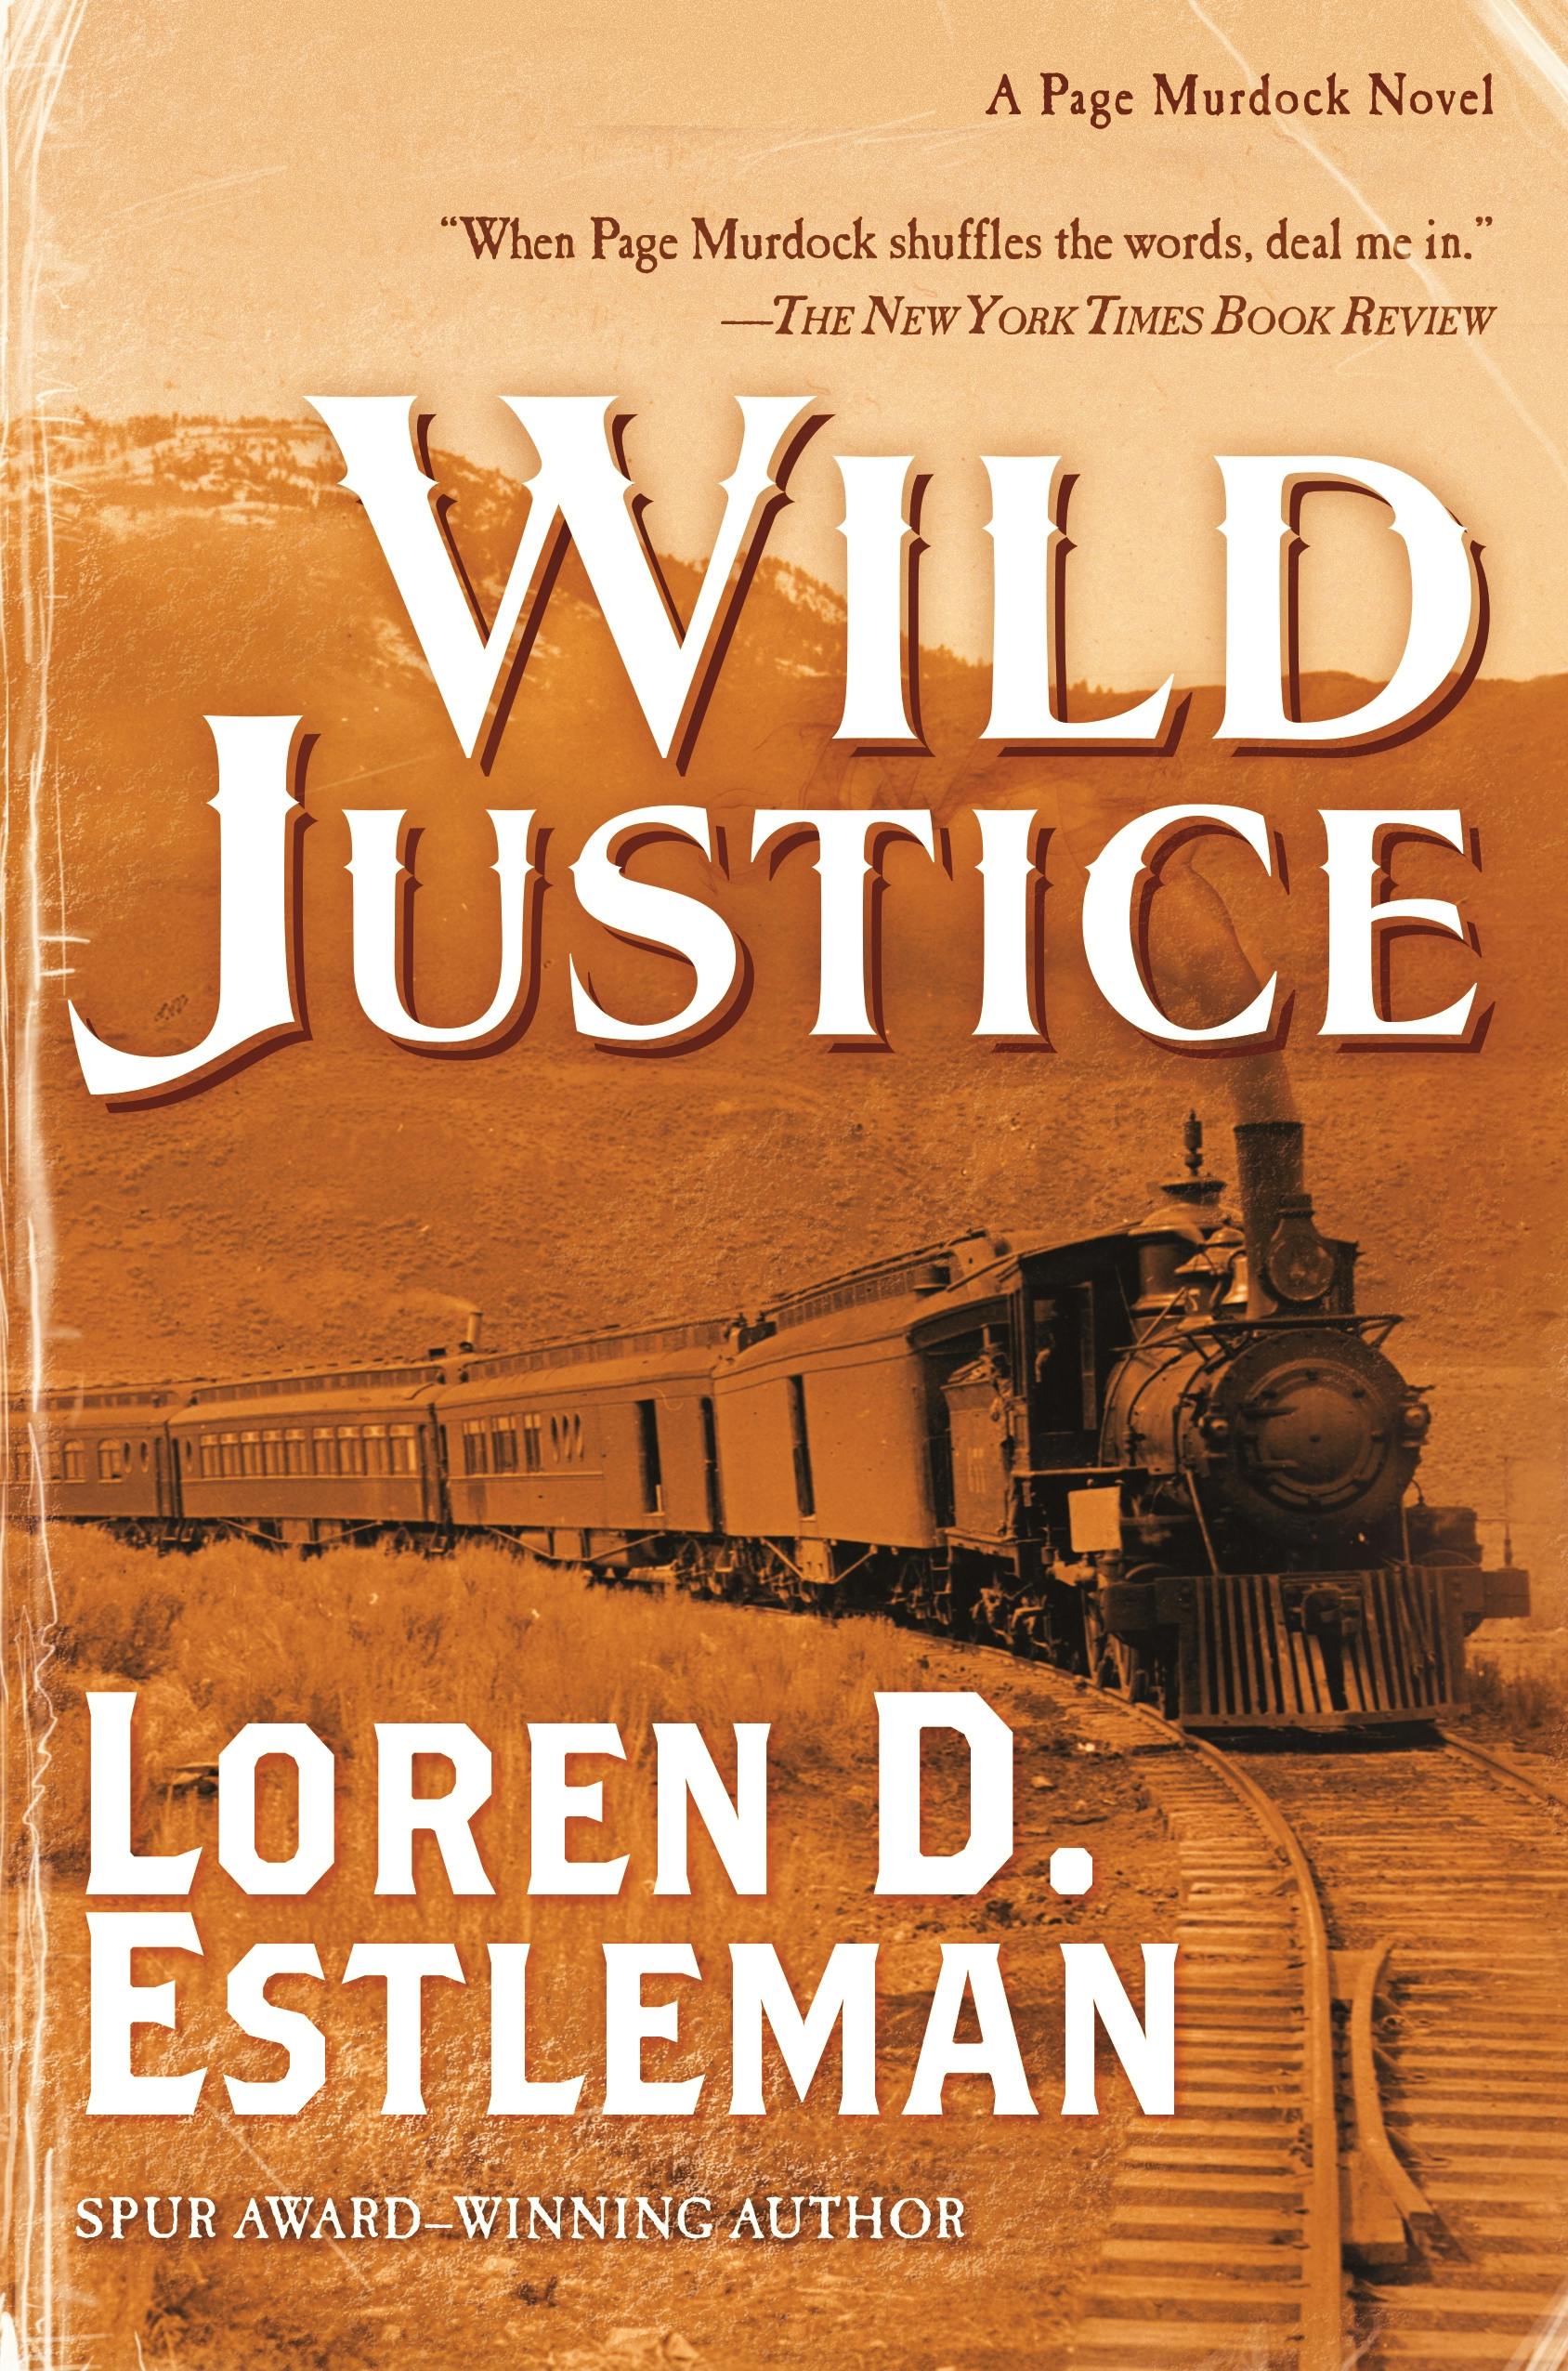 Cover for the book titled as: Wild Justice